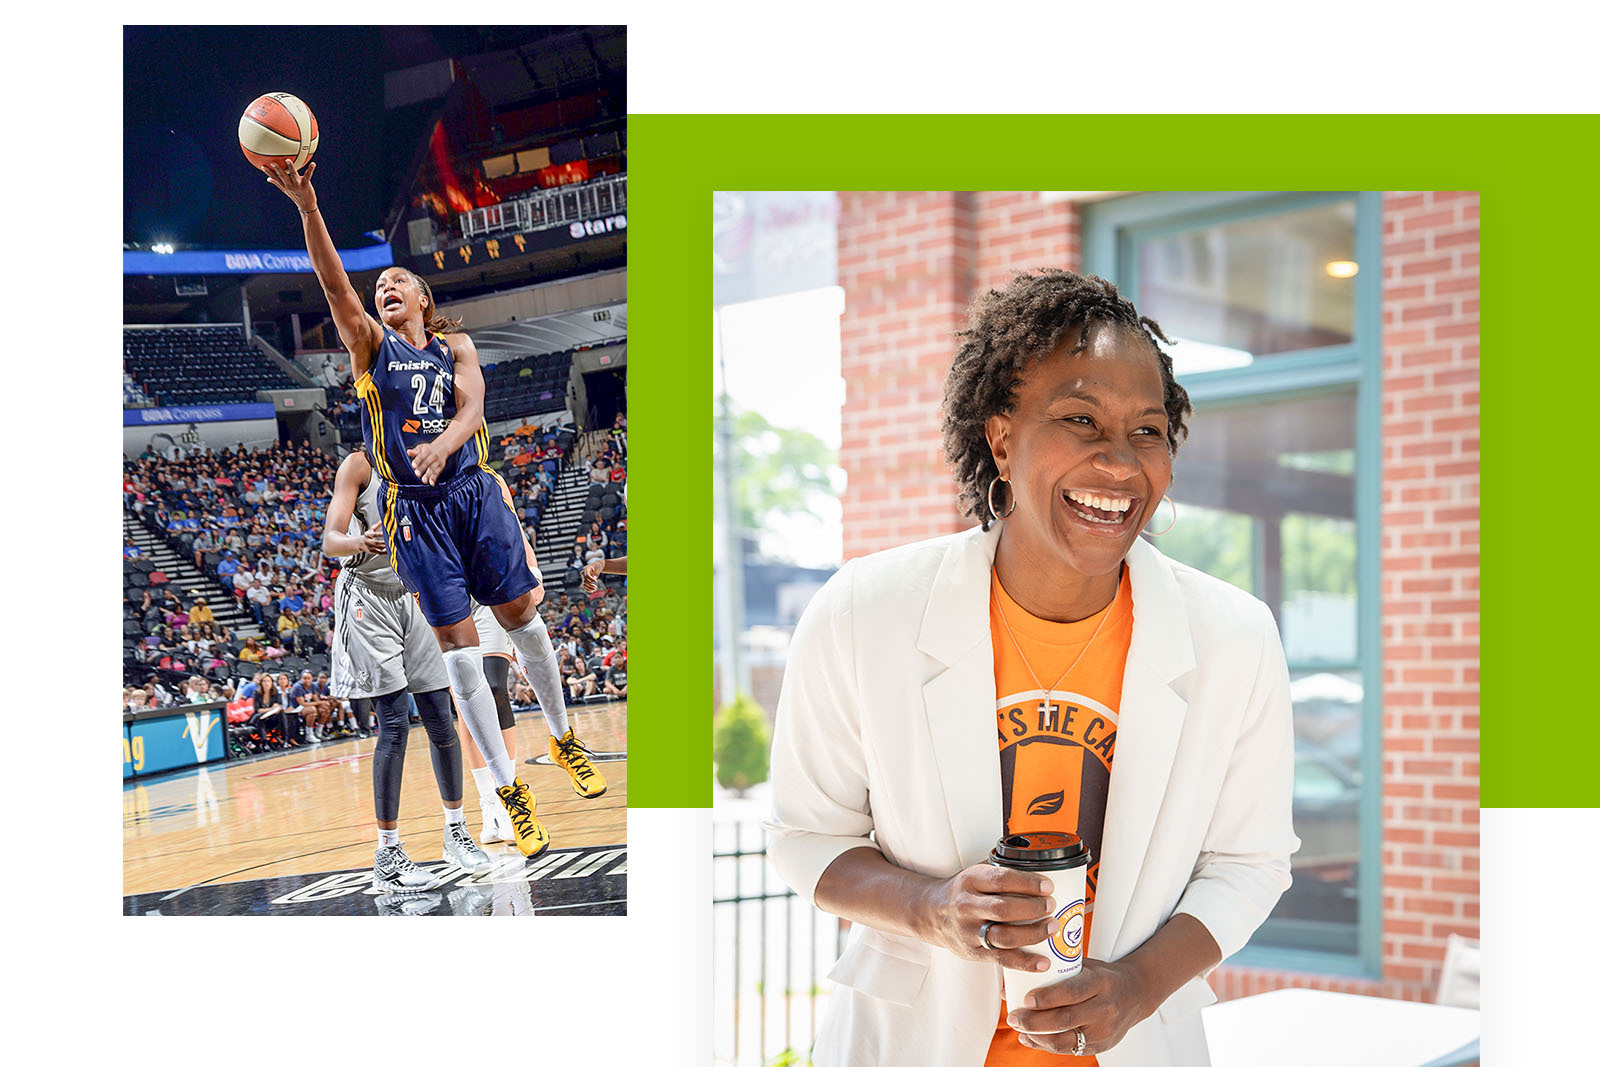 photos of Tamika Catchings. The first photos shows her on...